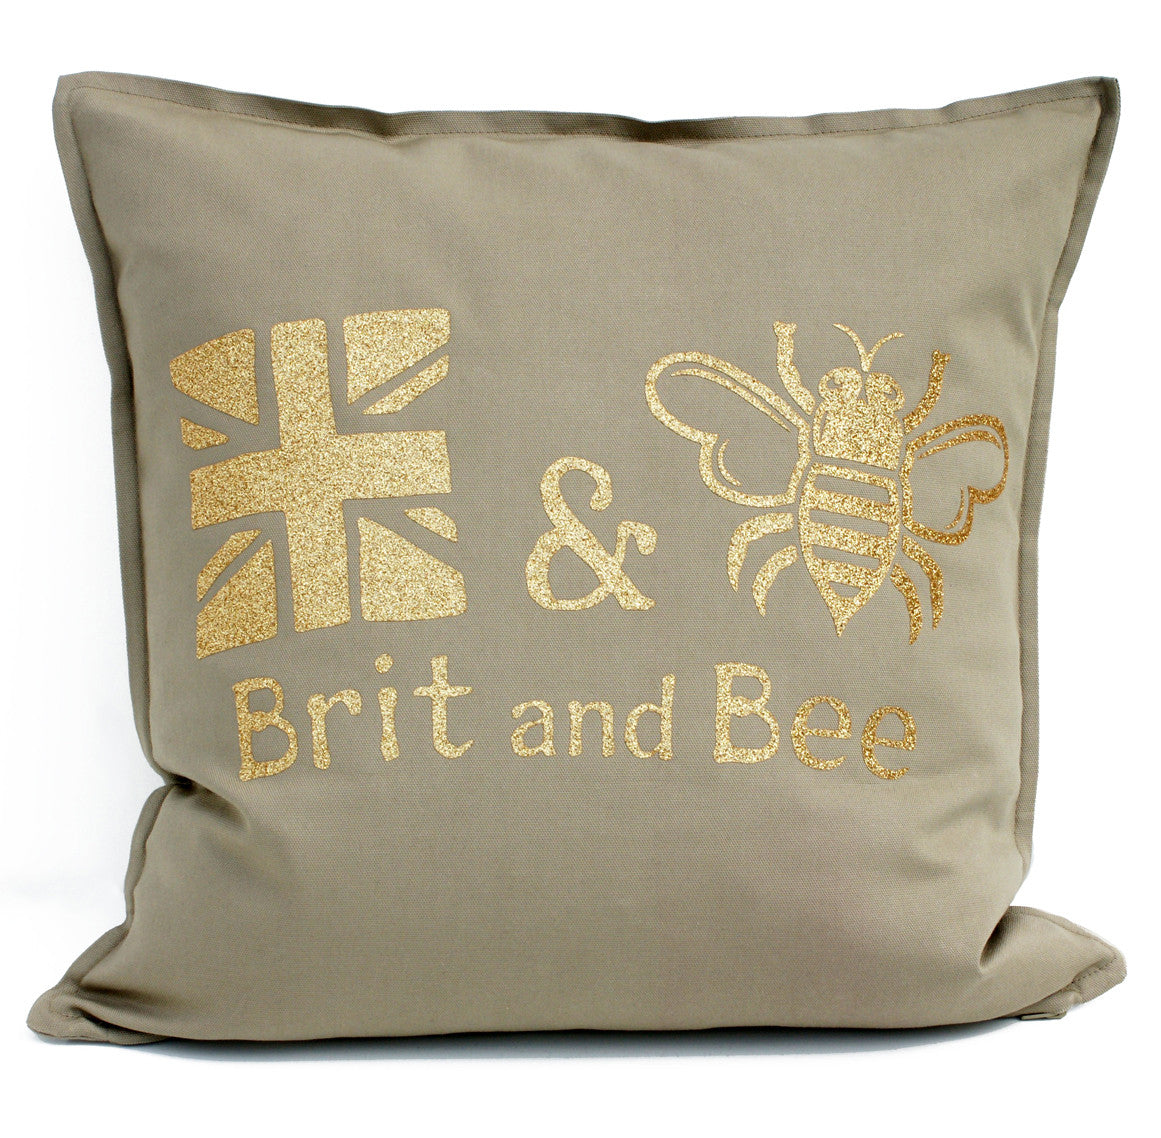 Brit and Bee Throw Pillow